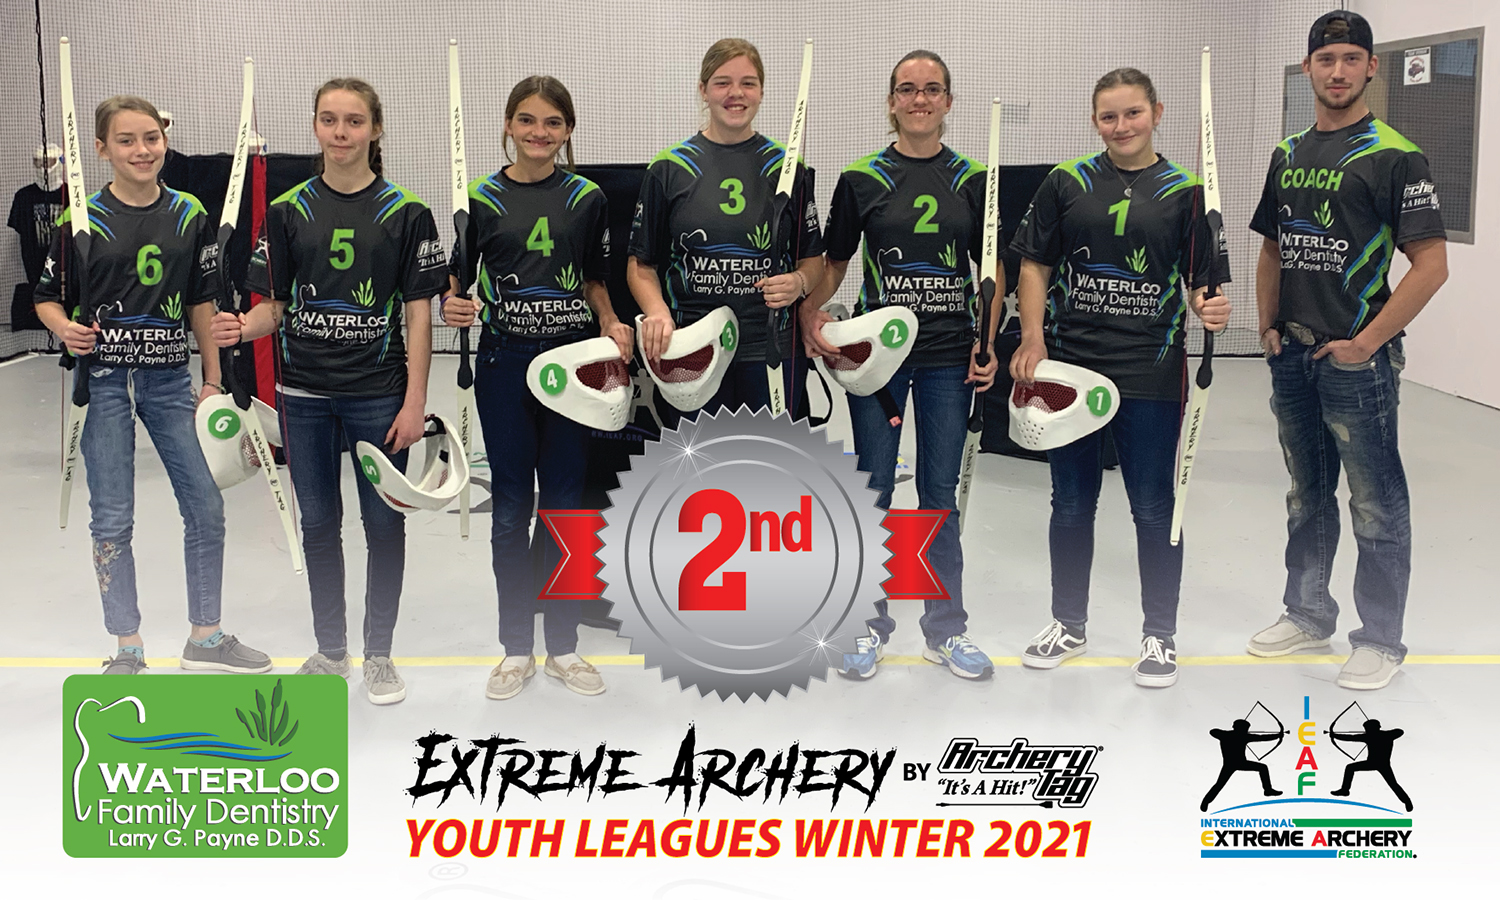 album_photos/2558_YouthLeague-Winter 2021_0001_YouthLeague-FallWinter2021-WaterlooDentistry-Team-6x4-Photo-2nd-01.jpg